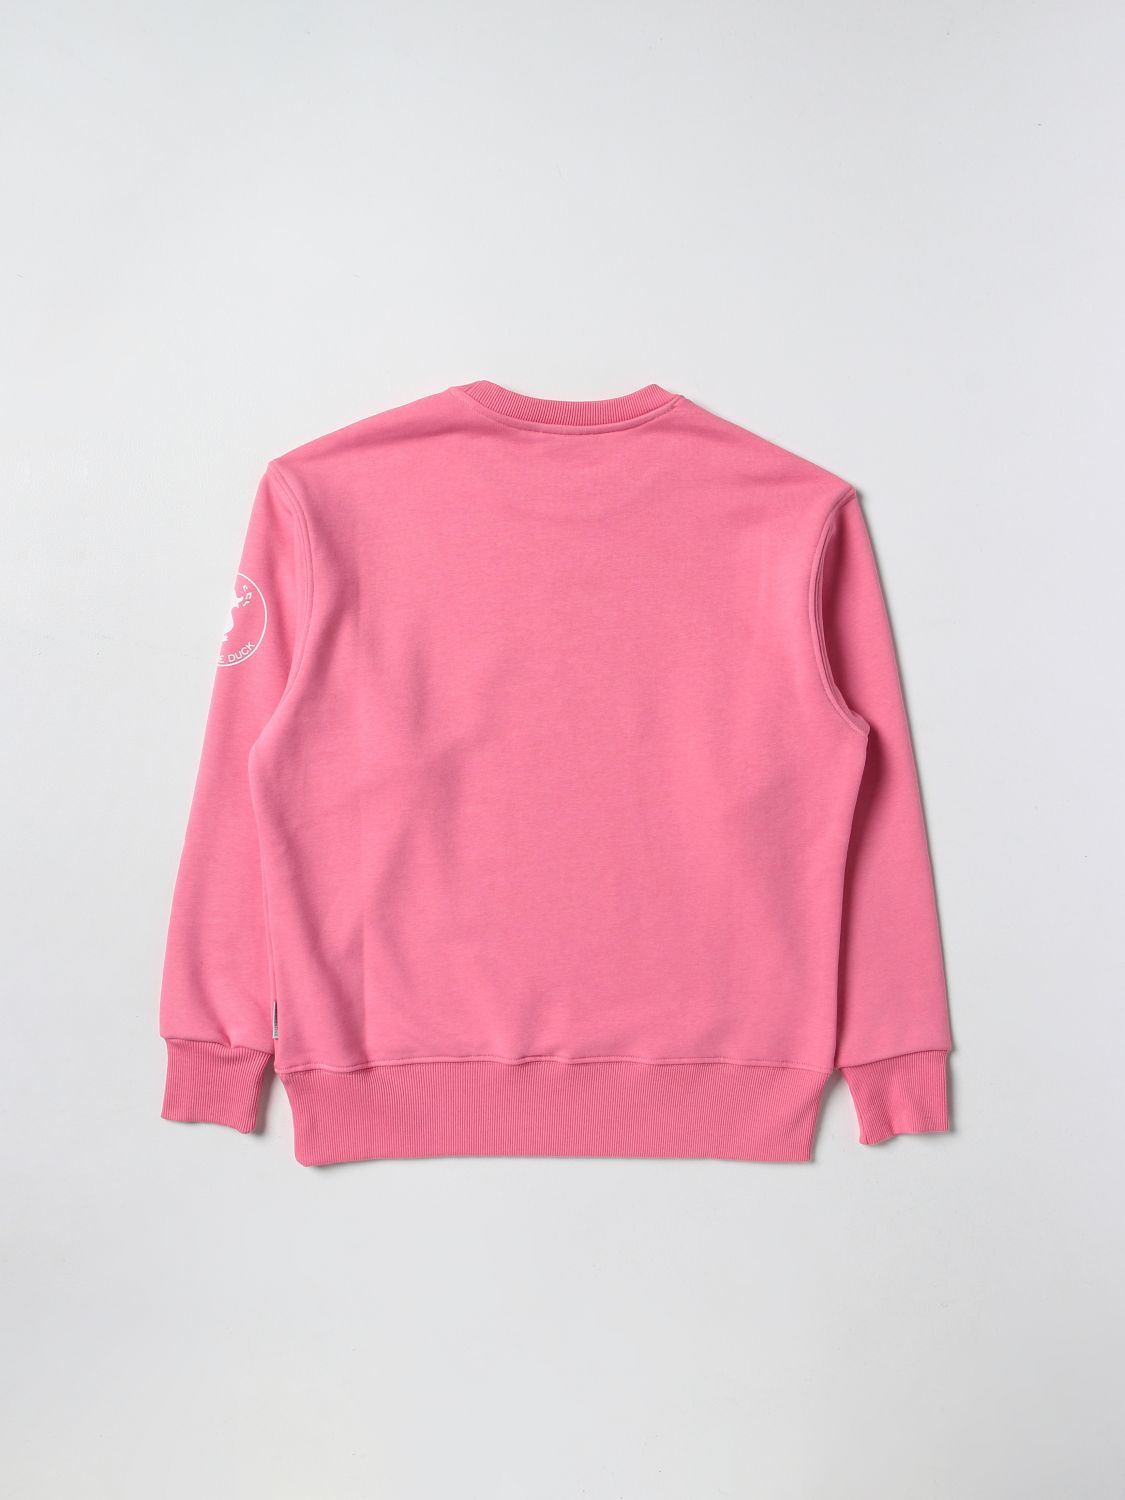 Save The Duck Outlet: jumper for girl - Pink | Save The Duck jumper ...